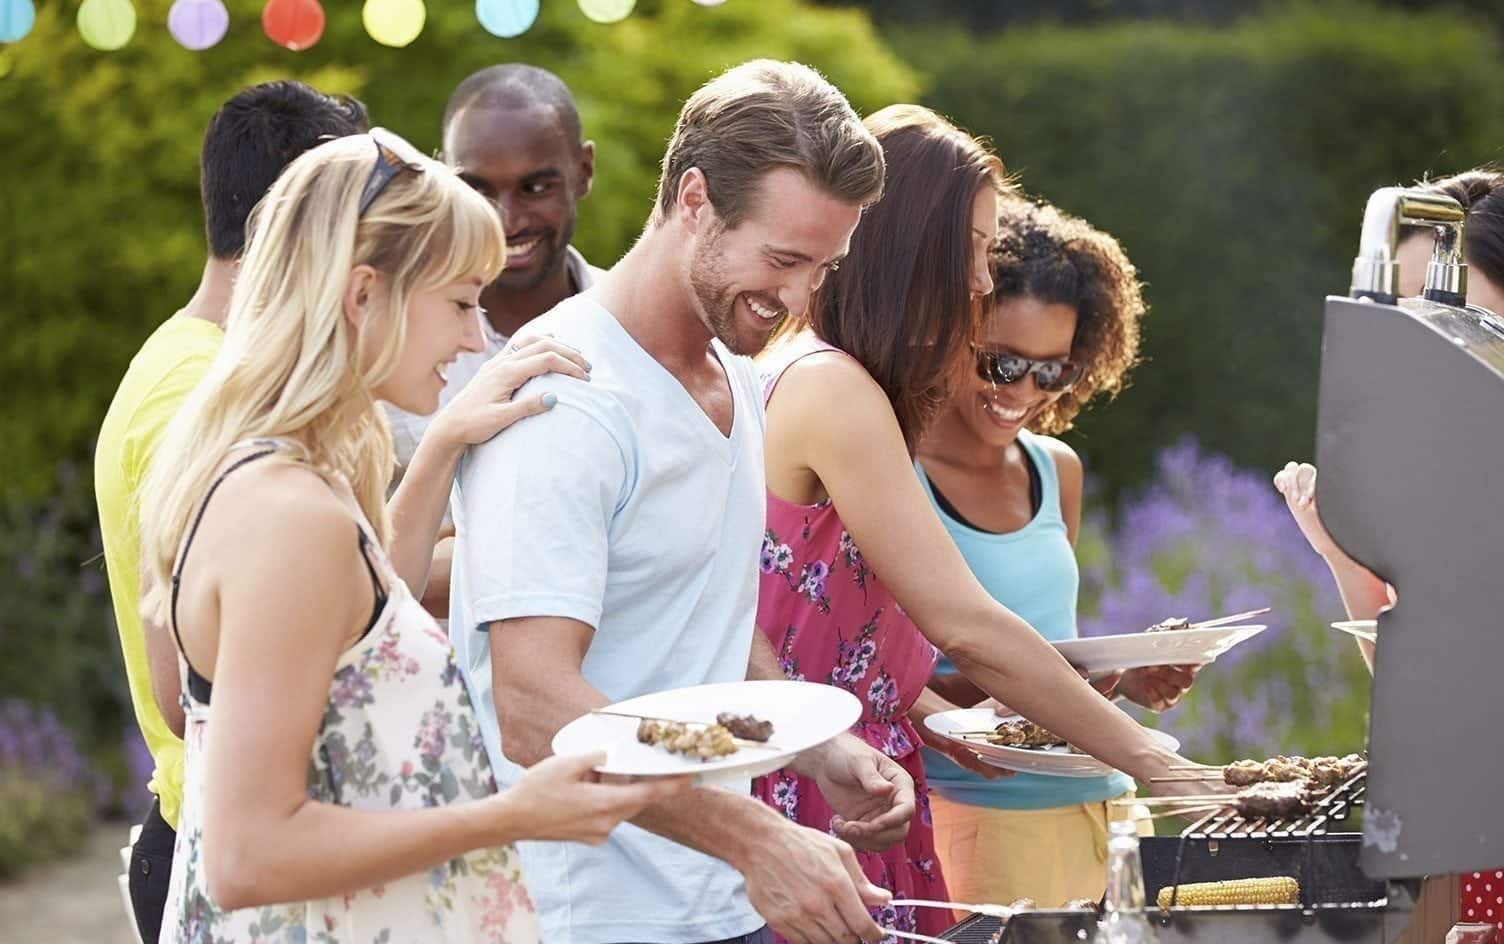 A group of people gathers around a BBQ grill outdoors. They are smiling and holding plates, preparing and serving food, sharing joy in communal meals. Colorful lights are strung above, and there is greenery in the background. The scene suggests a casual, social gathering where emotional eating creates bonds. MyFitnessPal Blog